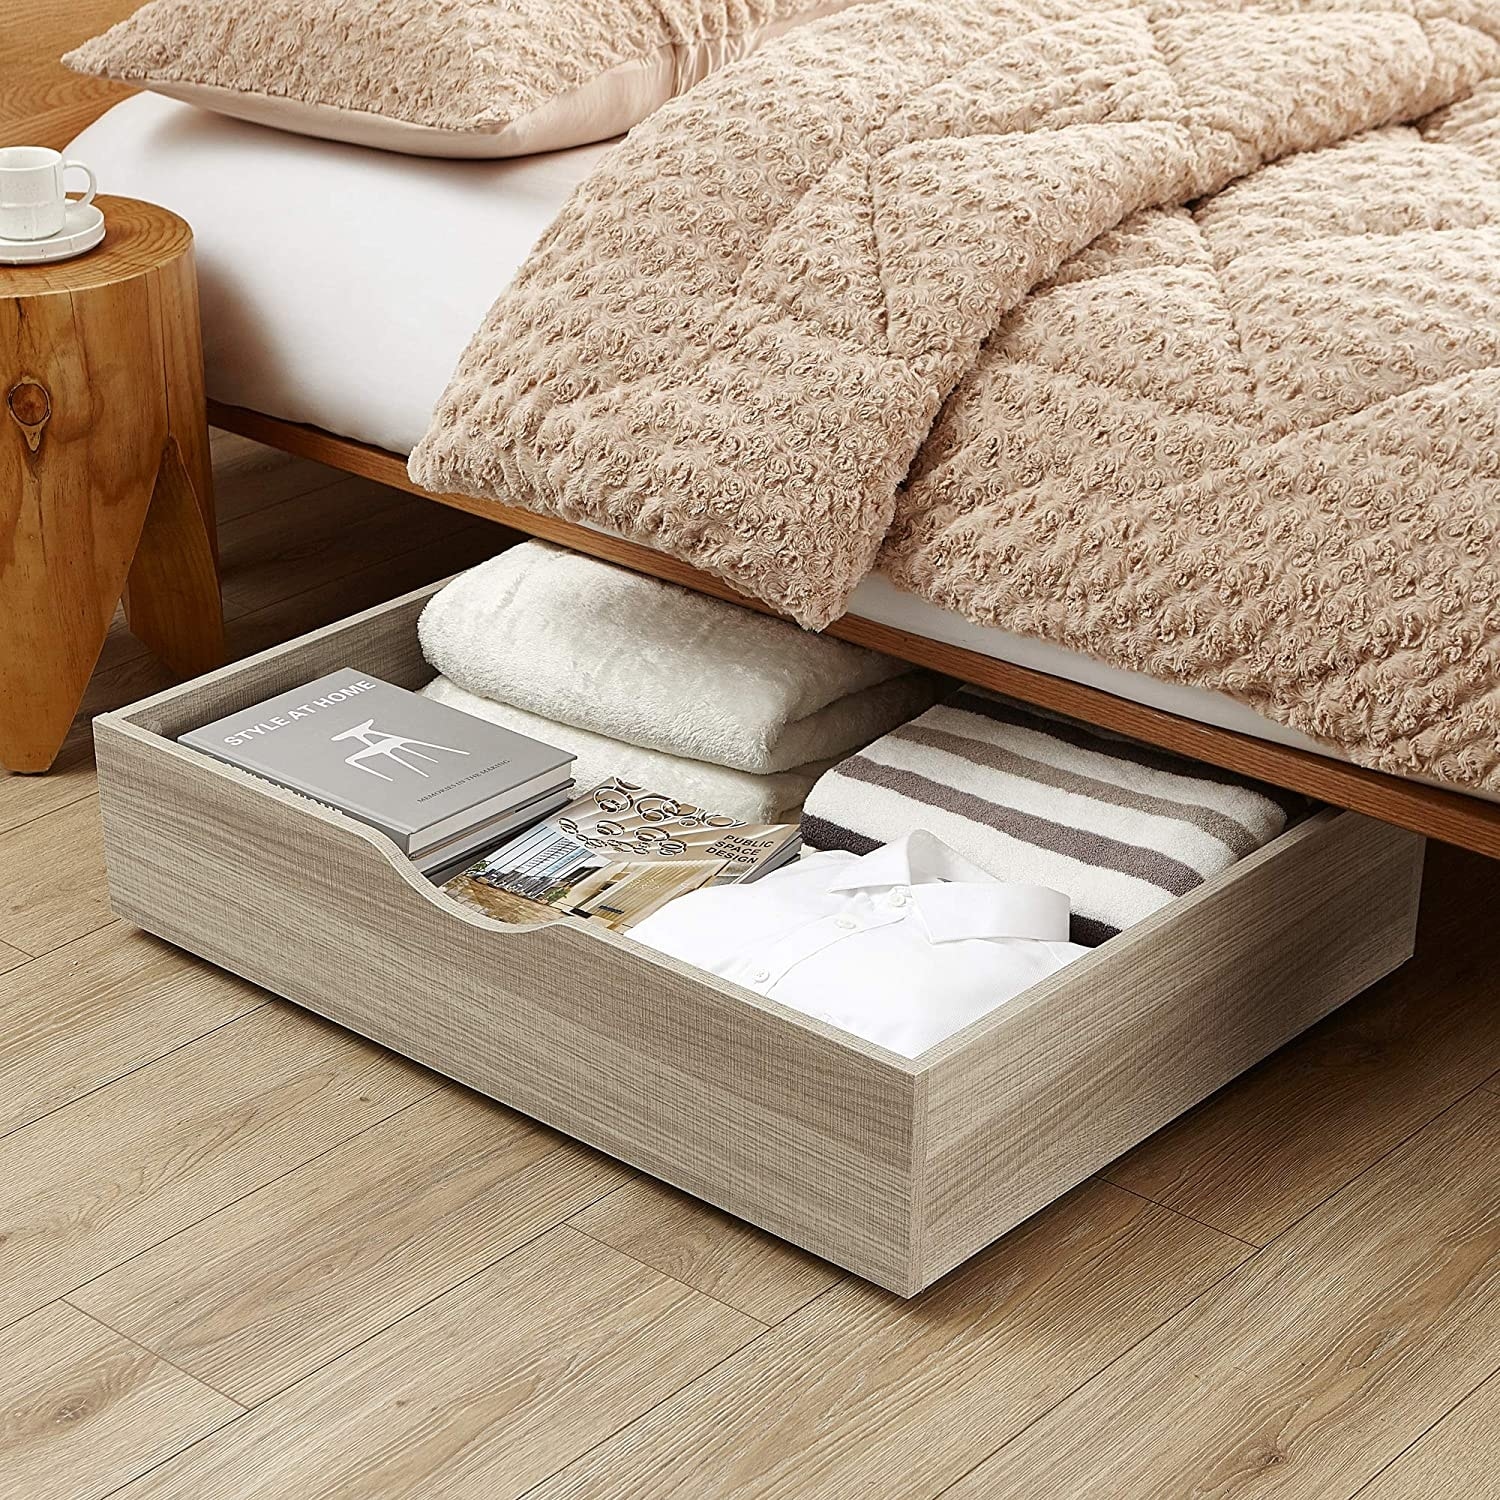 https://ak1.ostkcdn.com/images/products/is/images/direct/0fad99a76bc8c7f91bc2ae9b241152c627cf7756/The-Storage-MAX---Underbed-Wooden-Organizer-with-Wheels.jpg